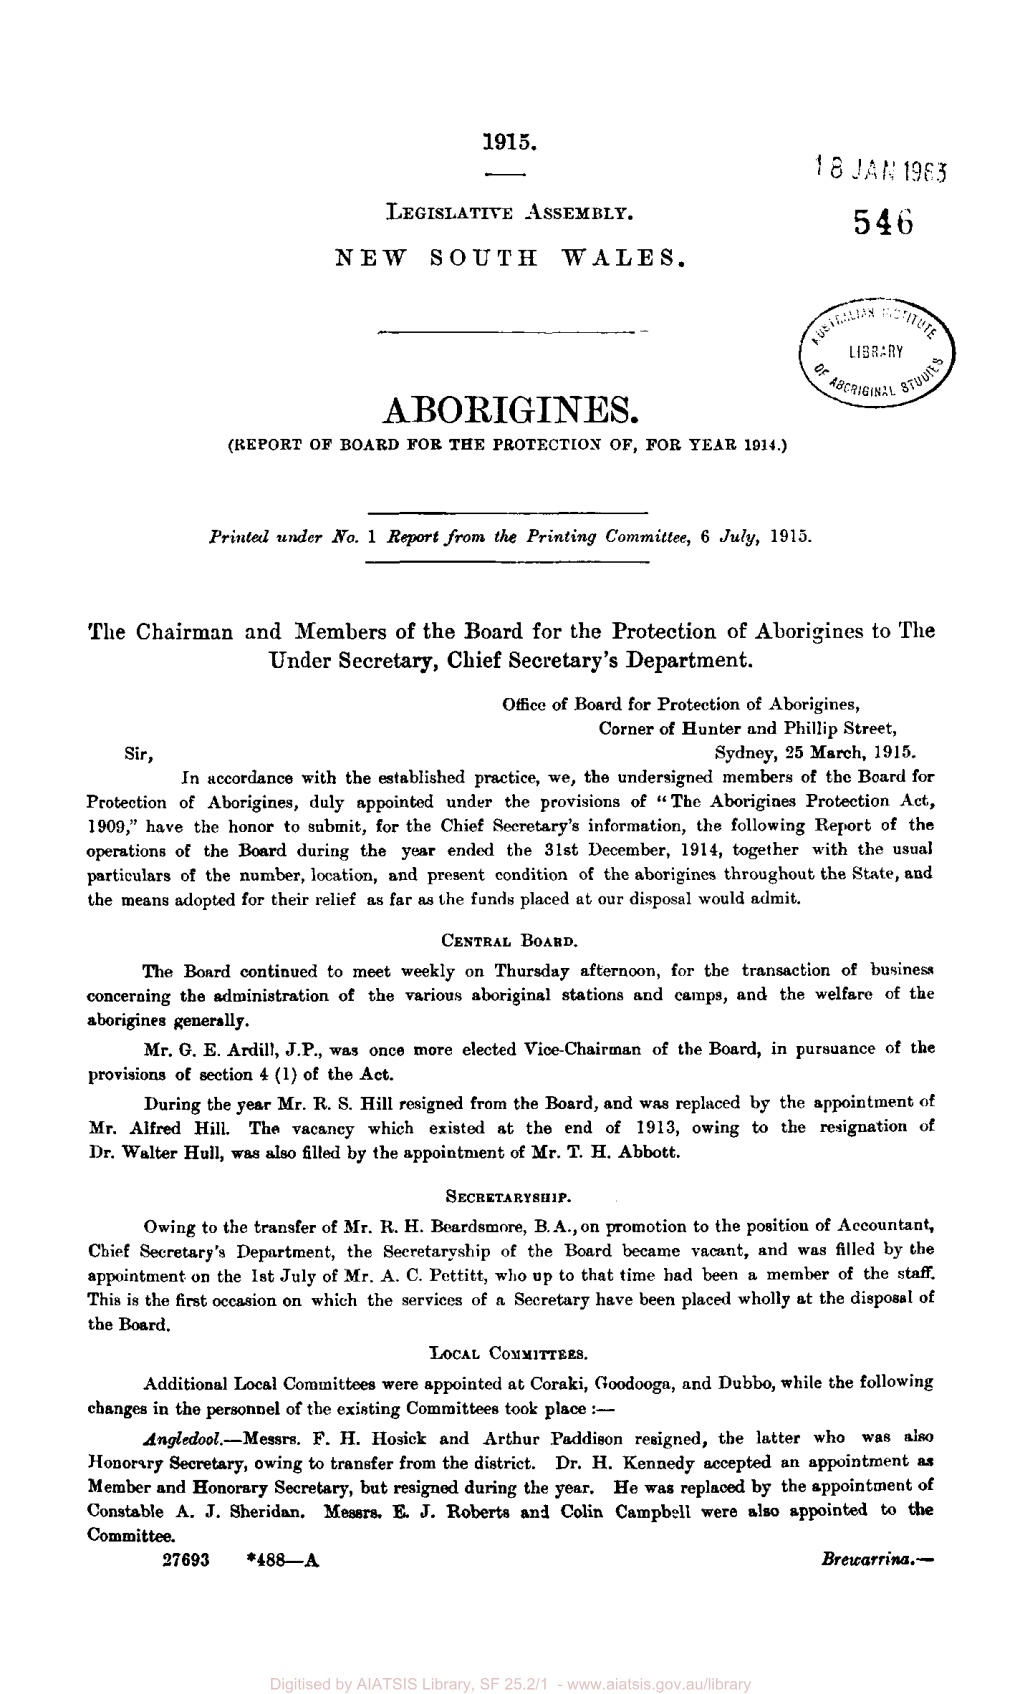 Aborigines, Report of Board for the Protection Of, for Year 1914